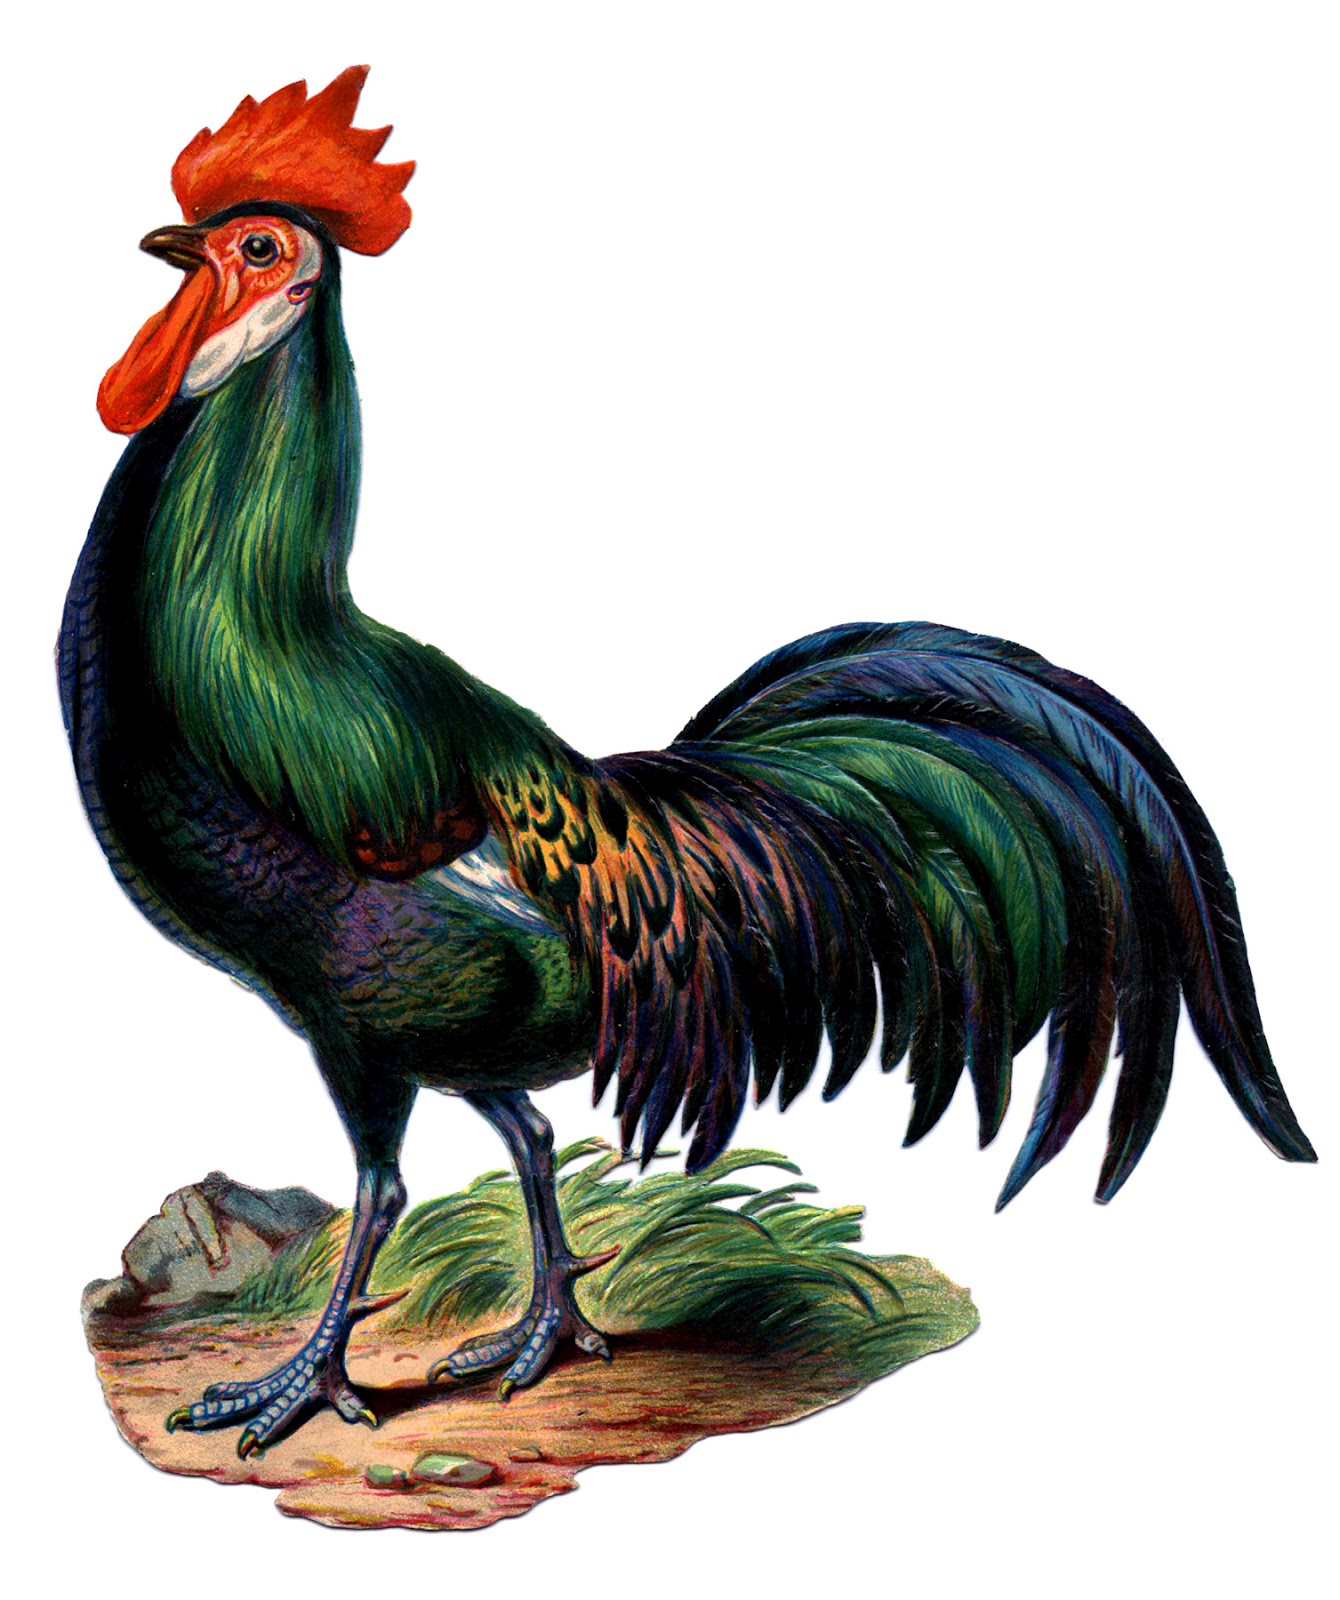 rooster clip art images - photo #37